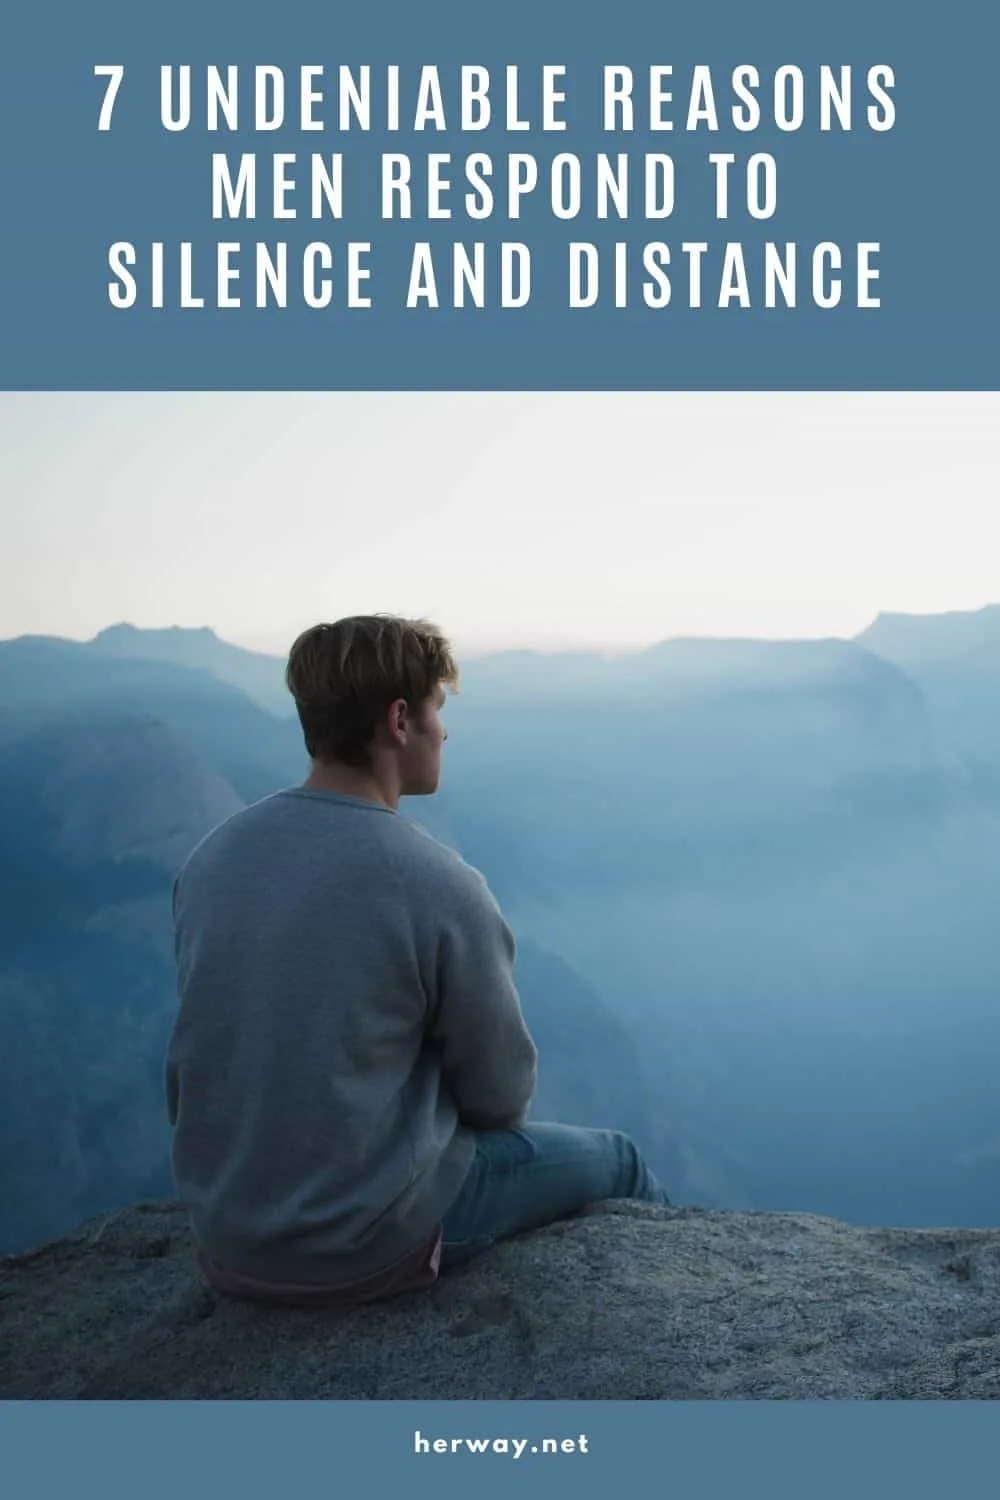 7 Undeniable Reasons Men Respond To Silence And Distance